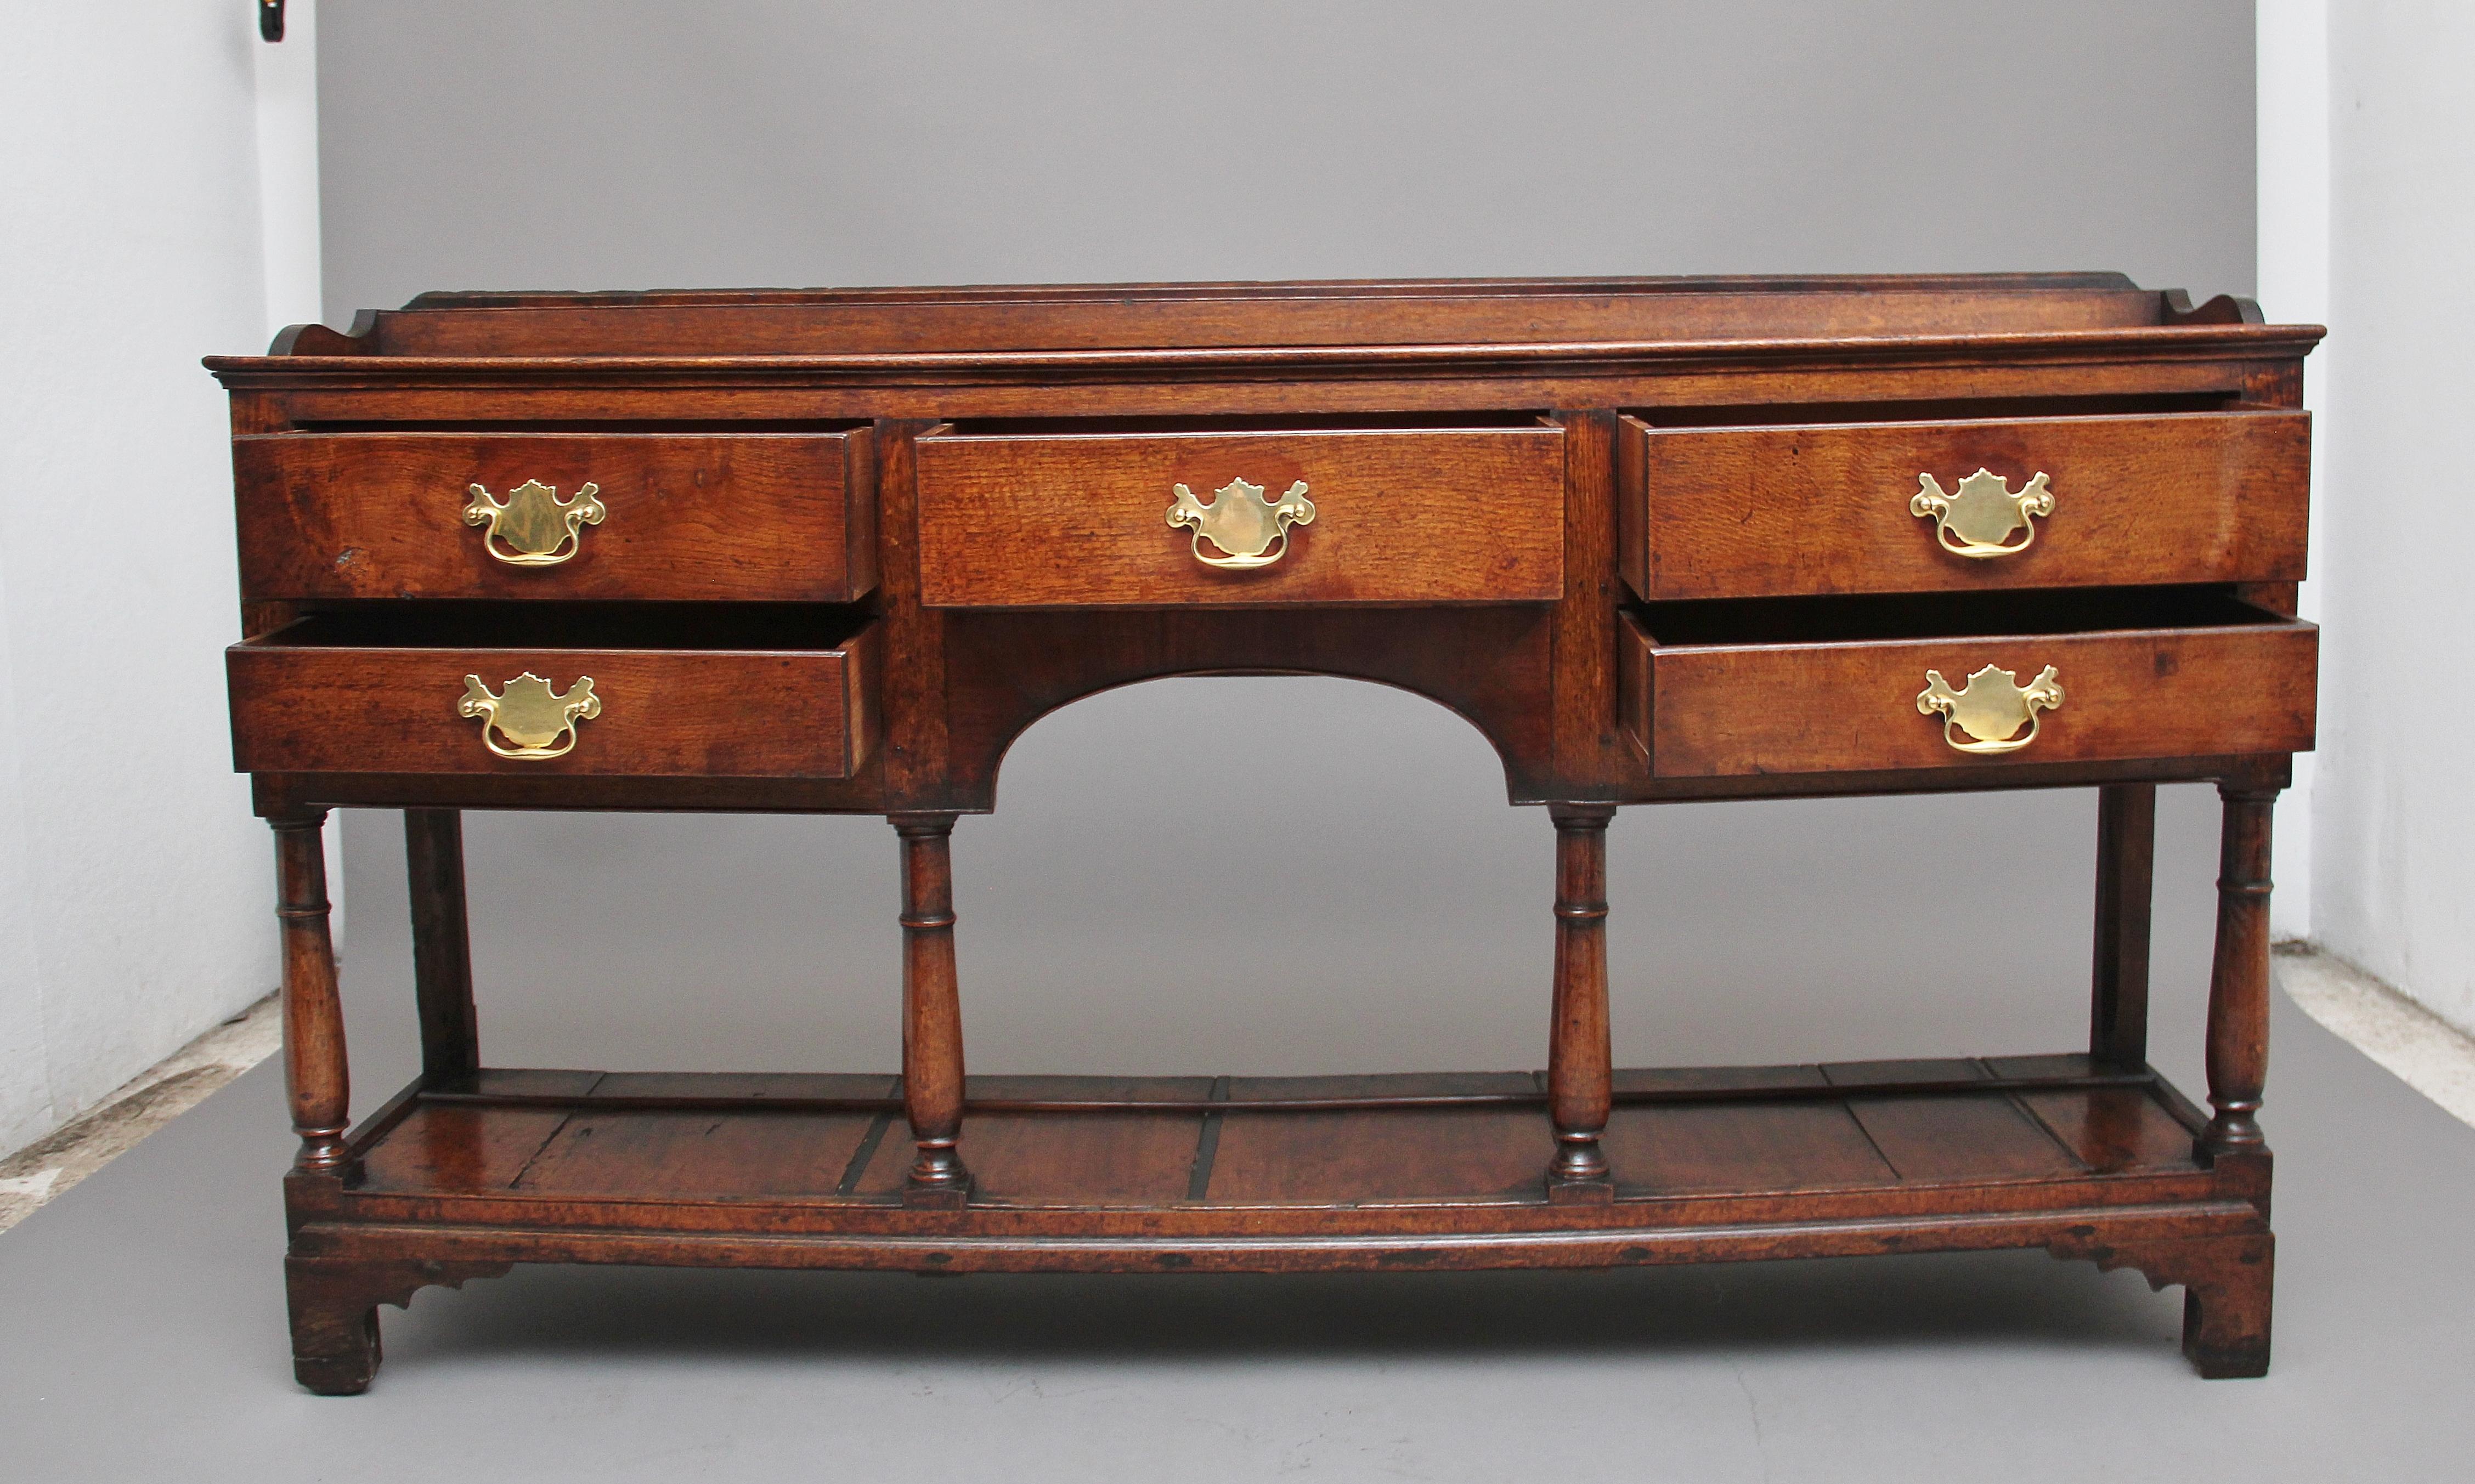 18th century oak potboard dresser, the rectangular top above a selection of five drawers with brass plate handles, having an arched frieze with a beaded edge with front turned column supports terminating onto a potboard, standing on square feet.